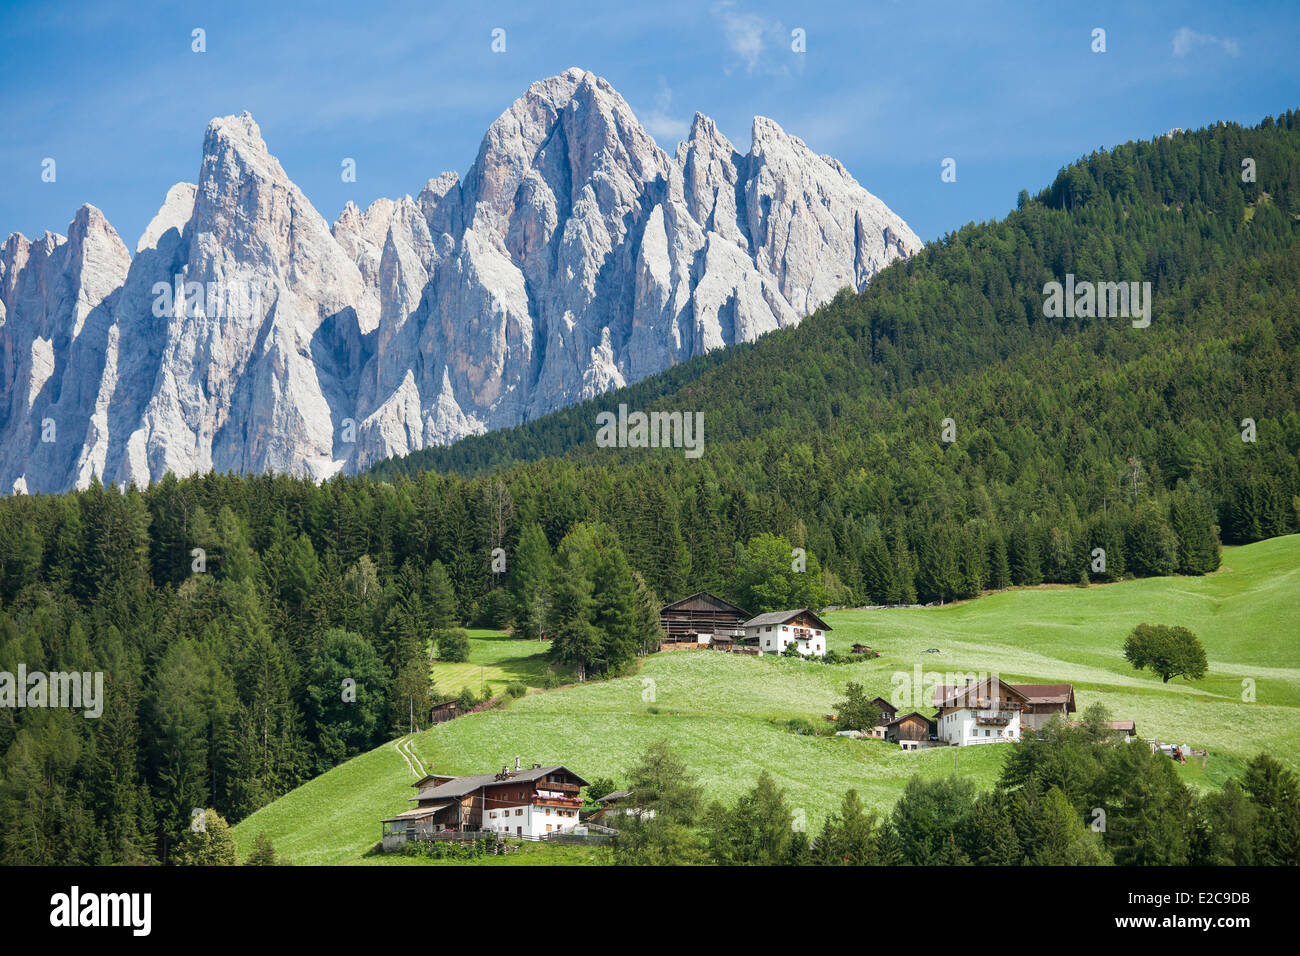 Italy, Trentino Alto Adige, Dolomites massif listed as World Heritage by UNESCO, Funes or Villnoss valley and Odle mountains Stock Photo